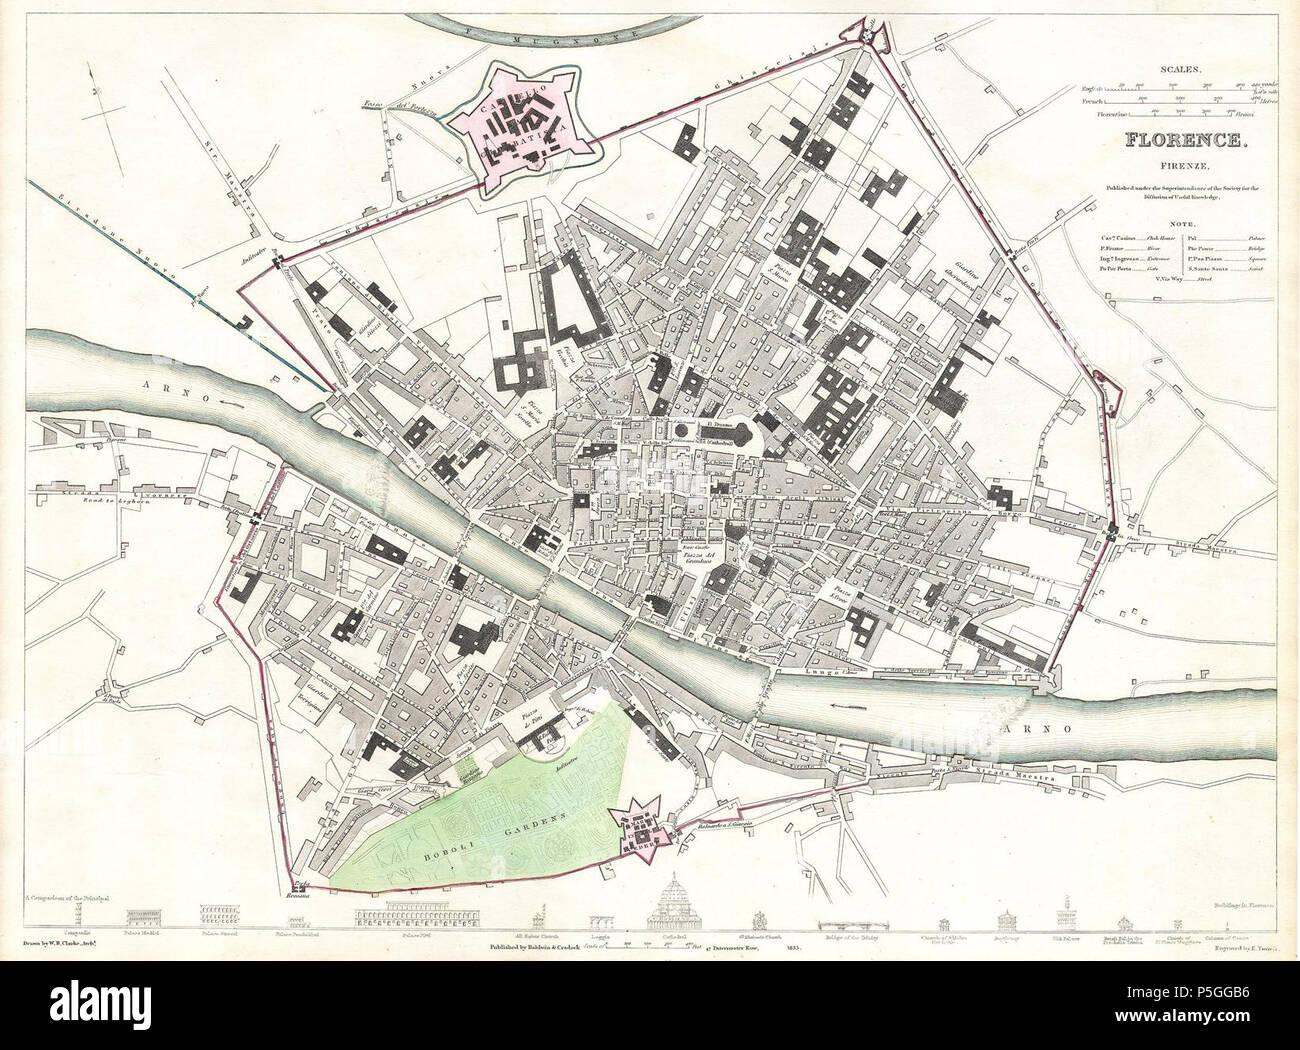 1835 S.D.U.K. Plan de la ville ou d'un Plan de Florence ou Firenze, Italie - Florence - Geographicus-SDUK-1835. Banque D'Images